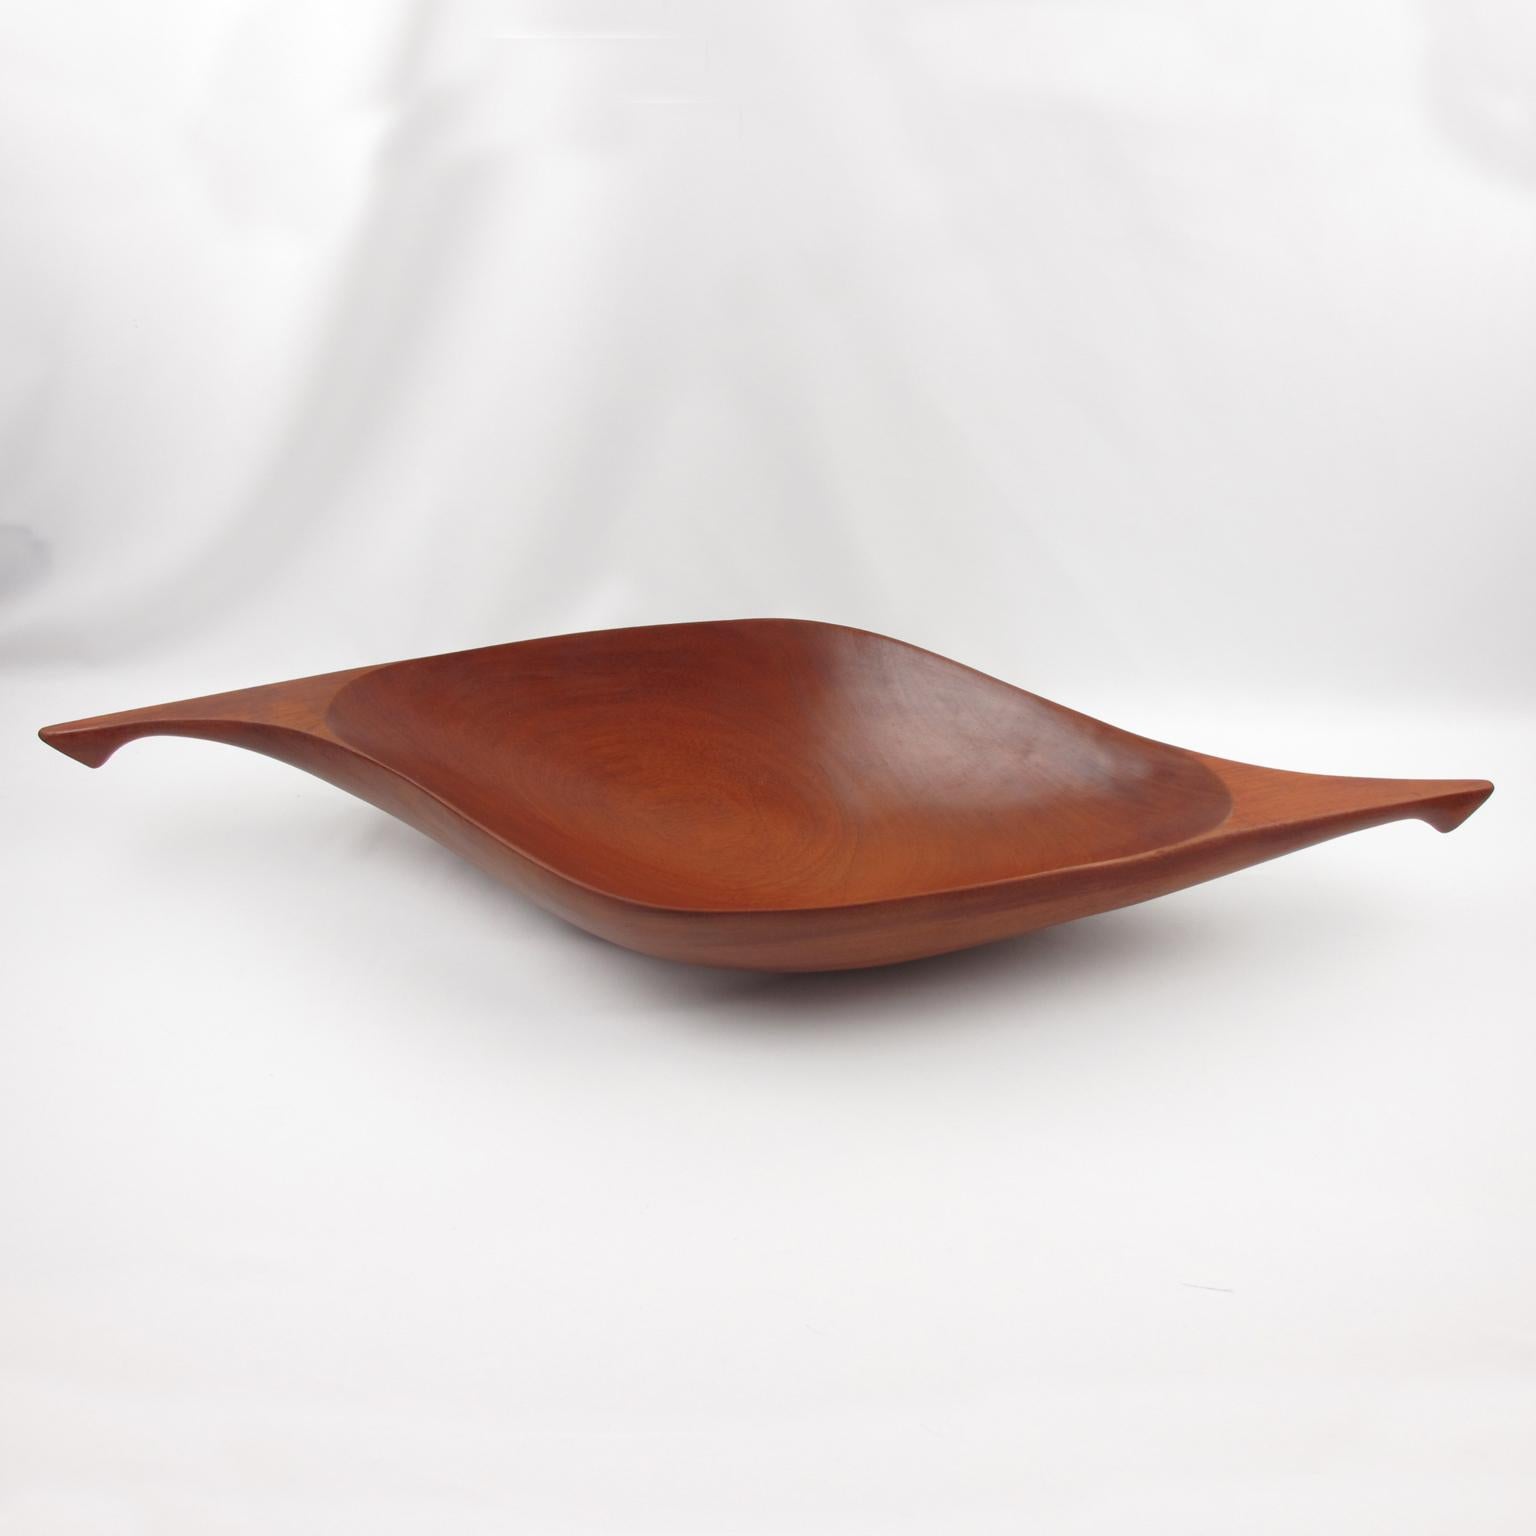 This modernist wooden canoe bowl or centerpiece from the Taverneau Collection was designed by Arthur Umanoff for Raymor and produced in Haiti. 
The sleek and premium oversized shape has a typical Danish flair. The carved and oiled tropical wood is